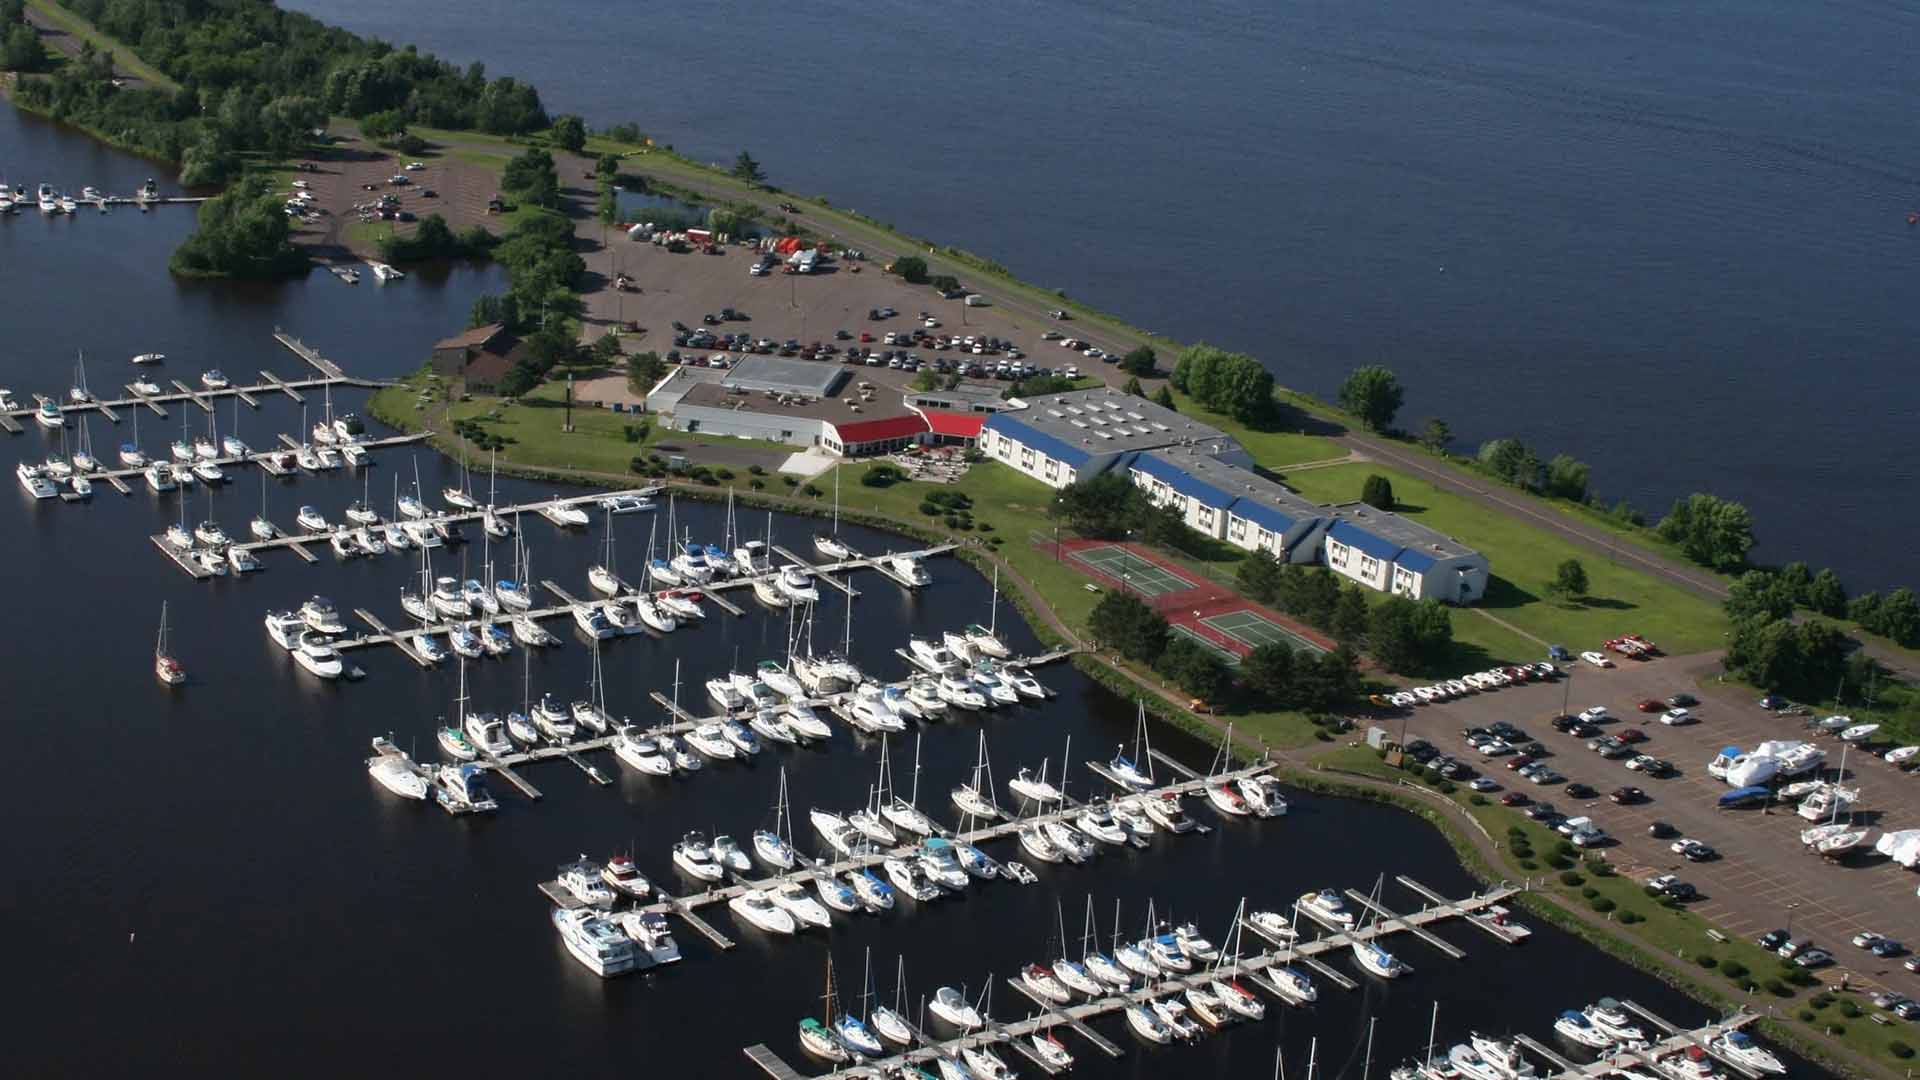 A birds-eye view of the Barkers Island Inn. The hotel is on the center of the island and is surrounded by sailboats on the marina.